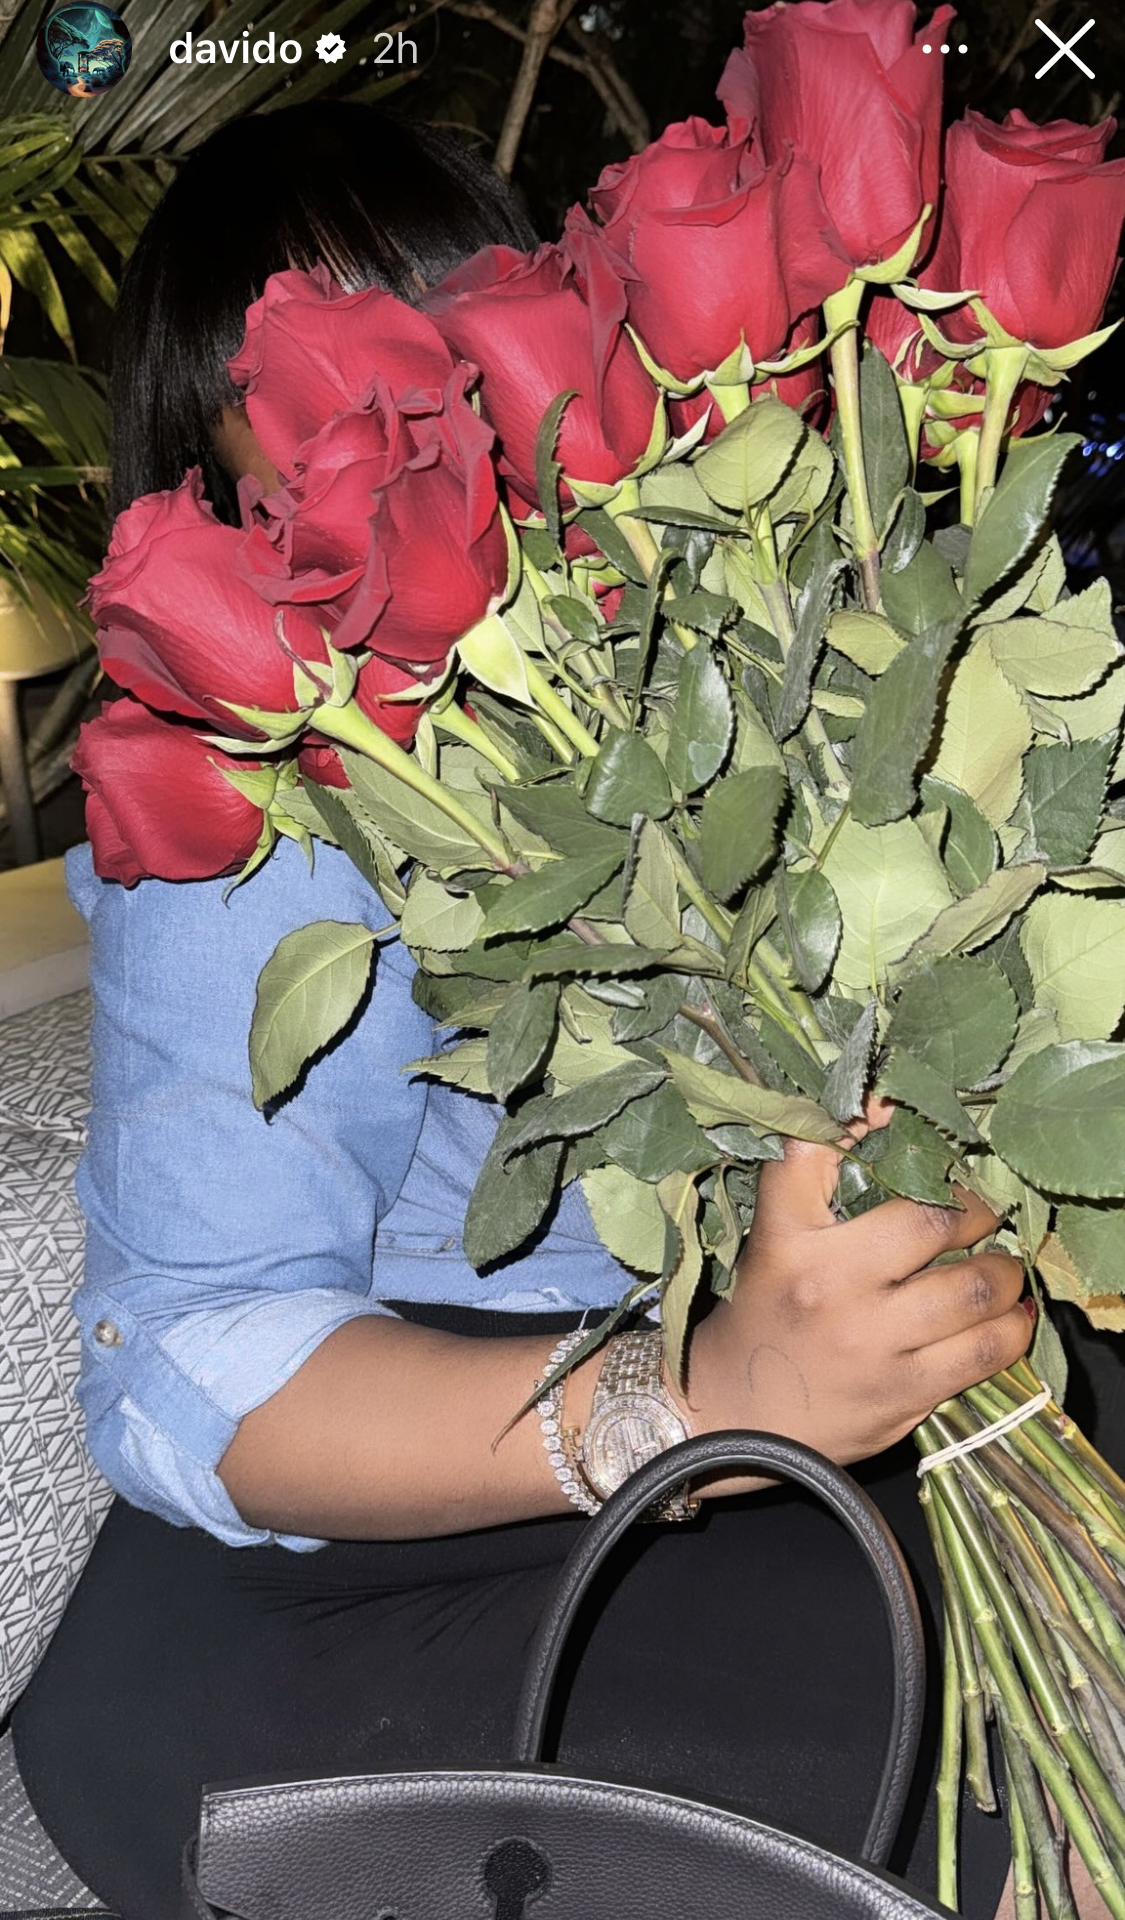 Days after side chick scandal Davido gifts Chioma over N72M, flowers ahead of 29th birthday [photos]